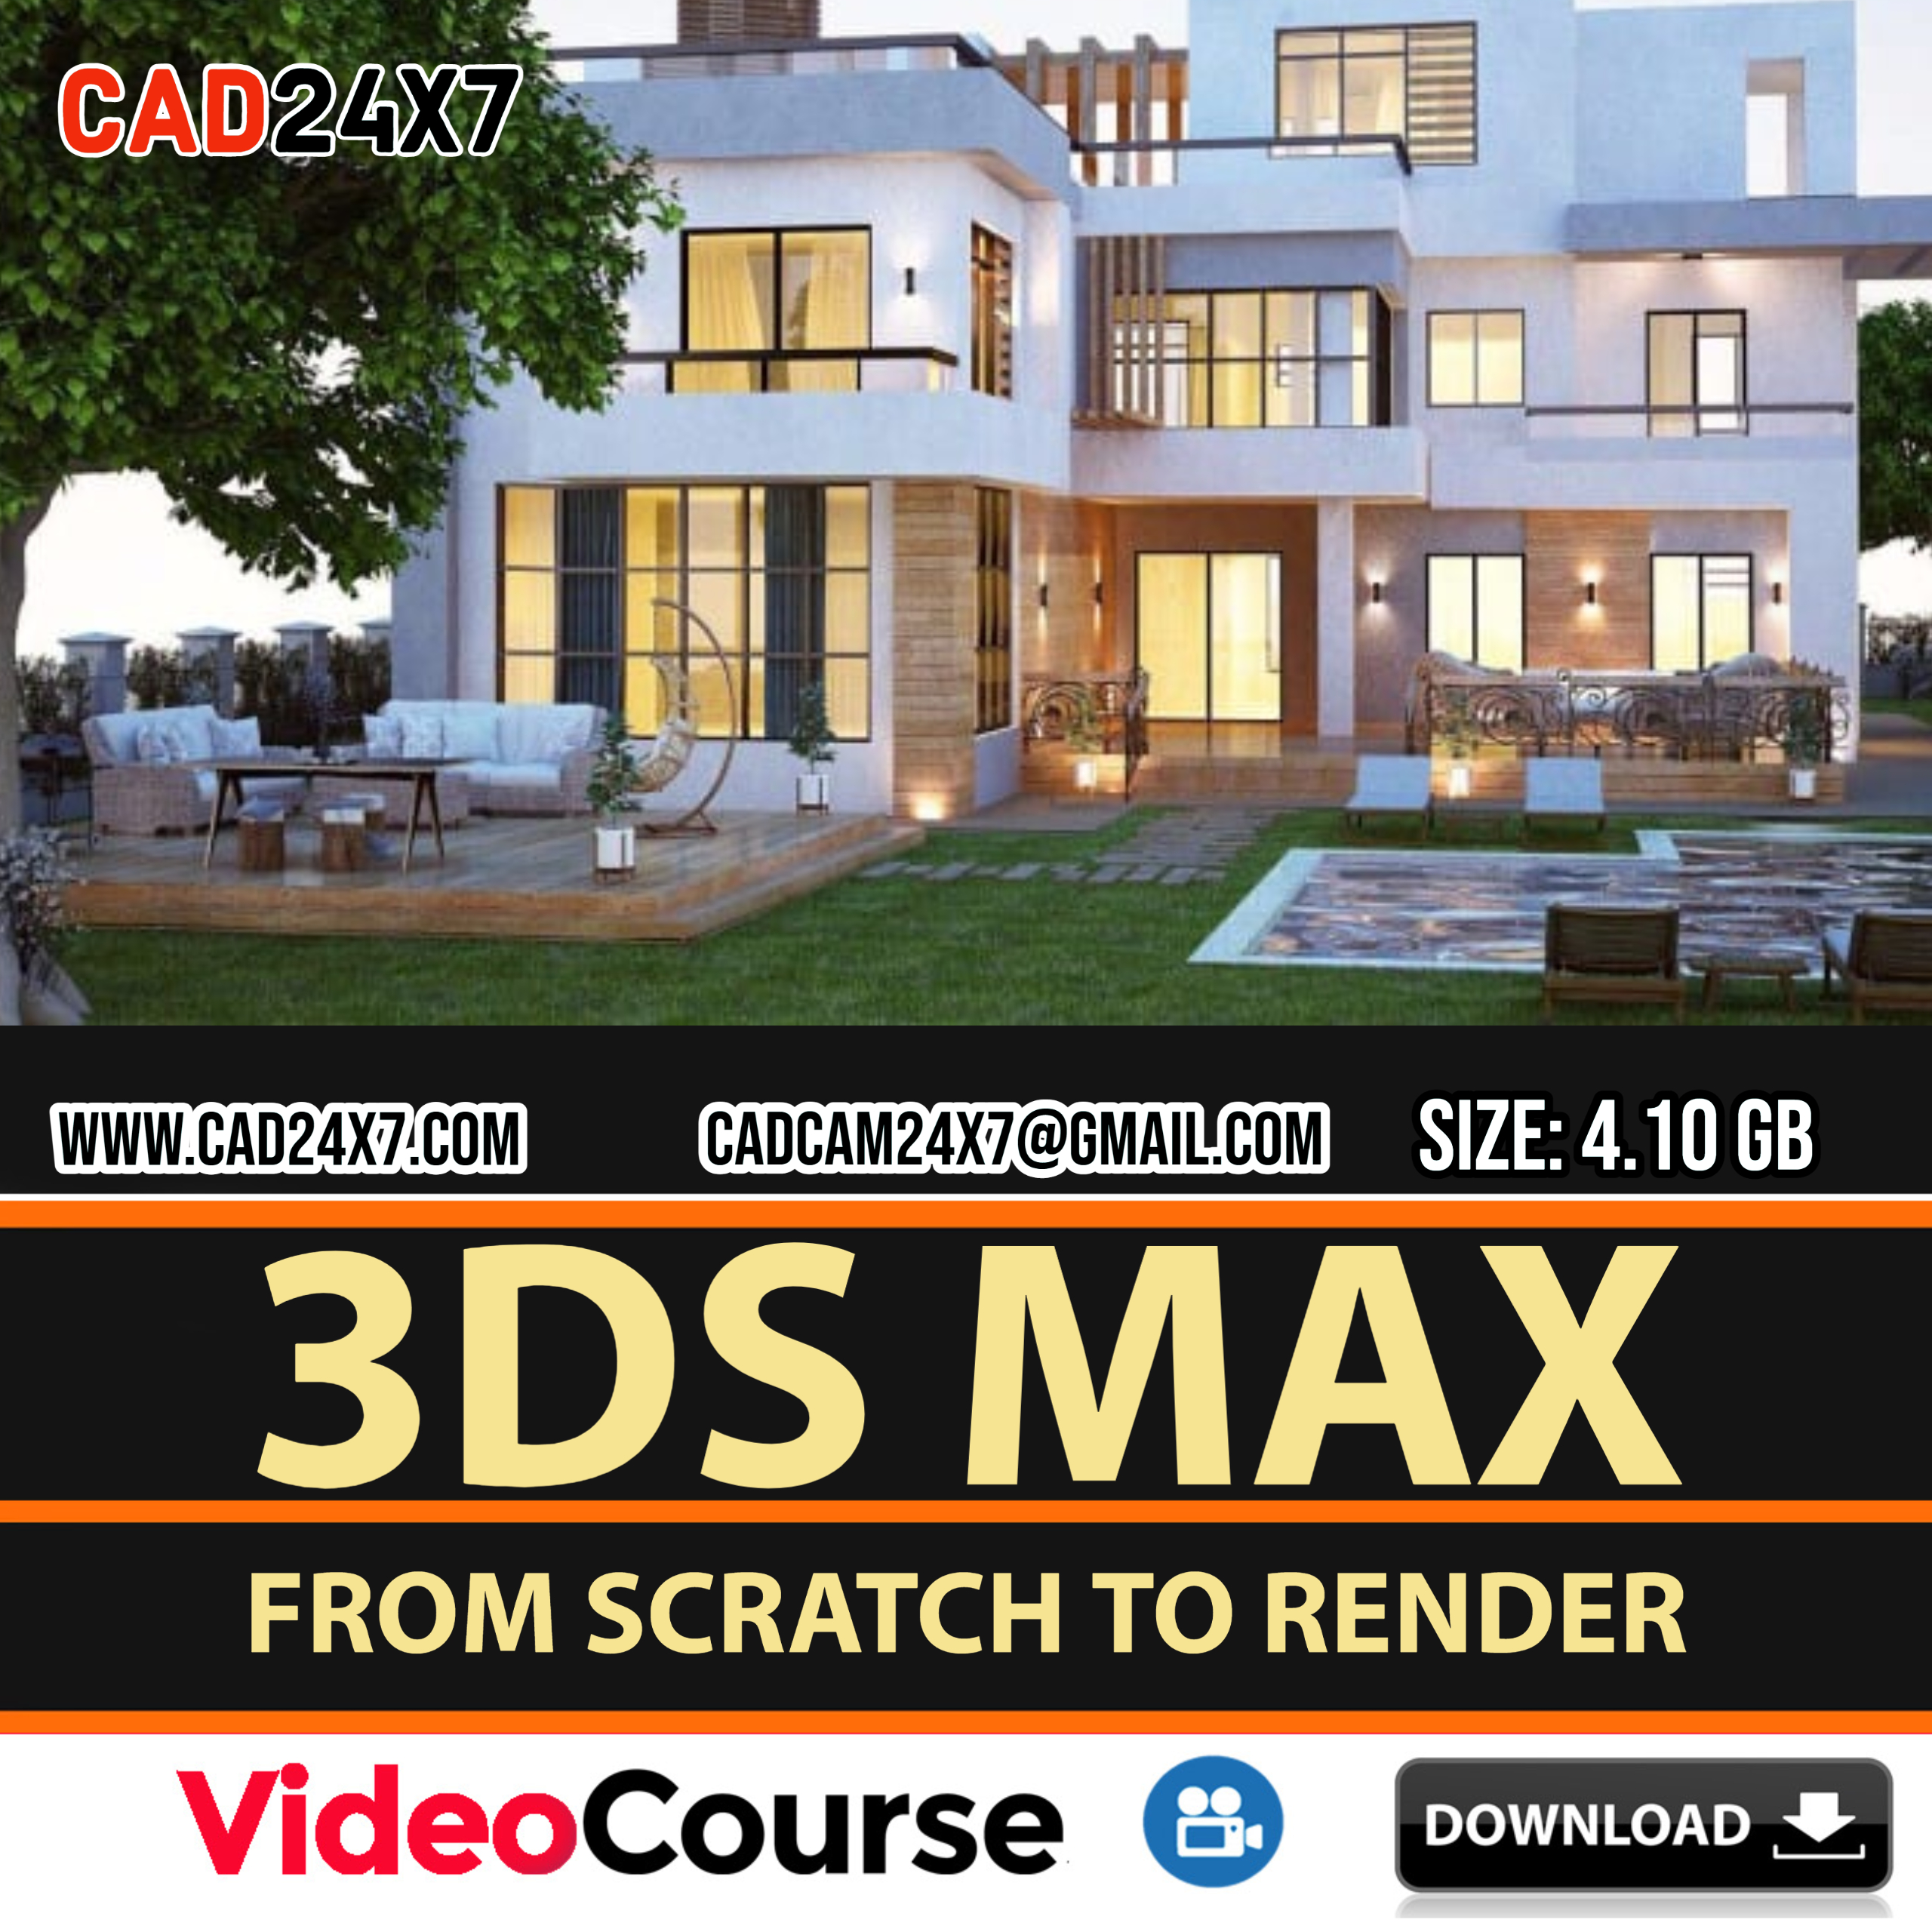 3ds Max from scratch to render